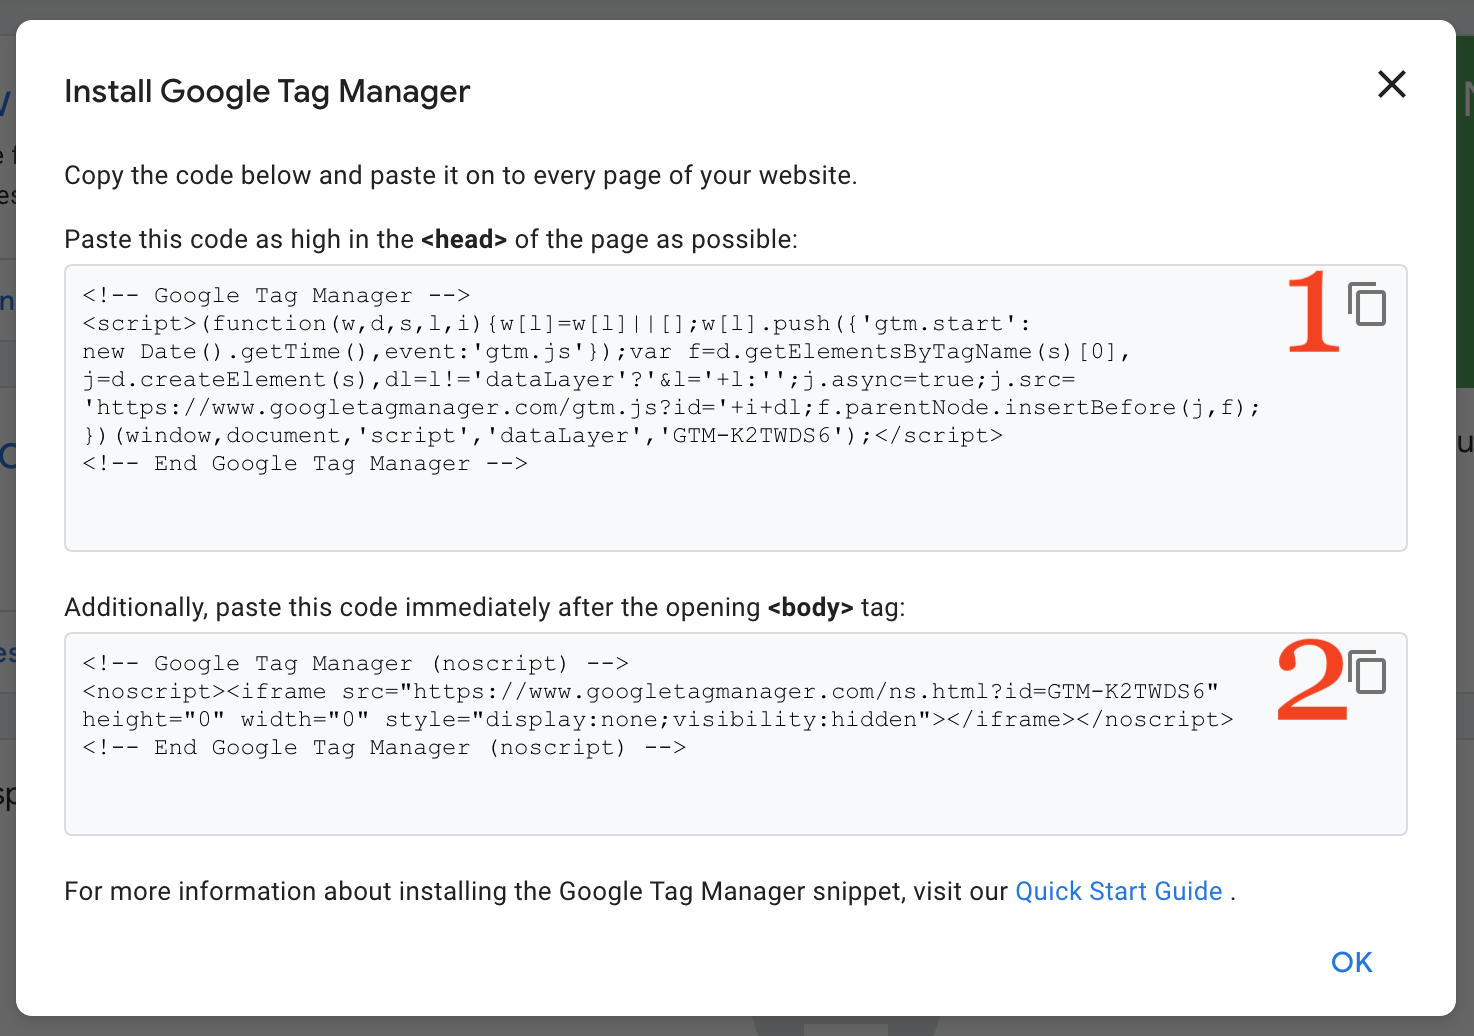 Steps to install Google Tag Manager